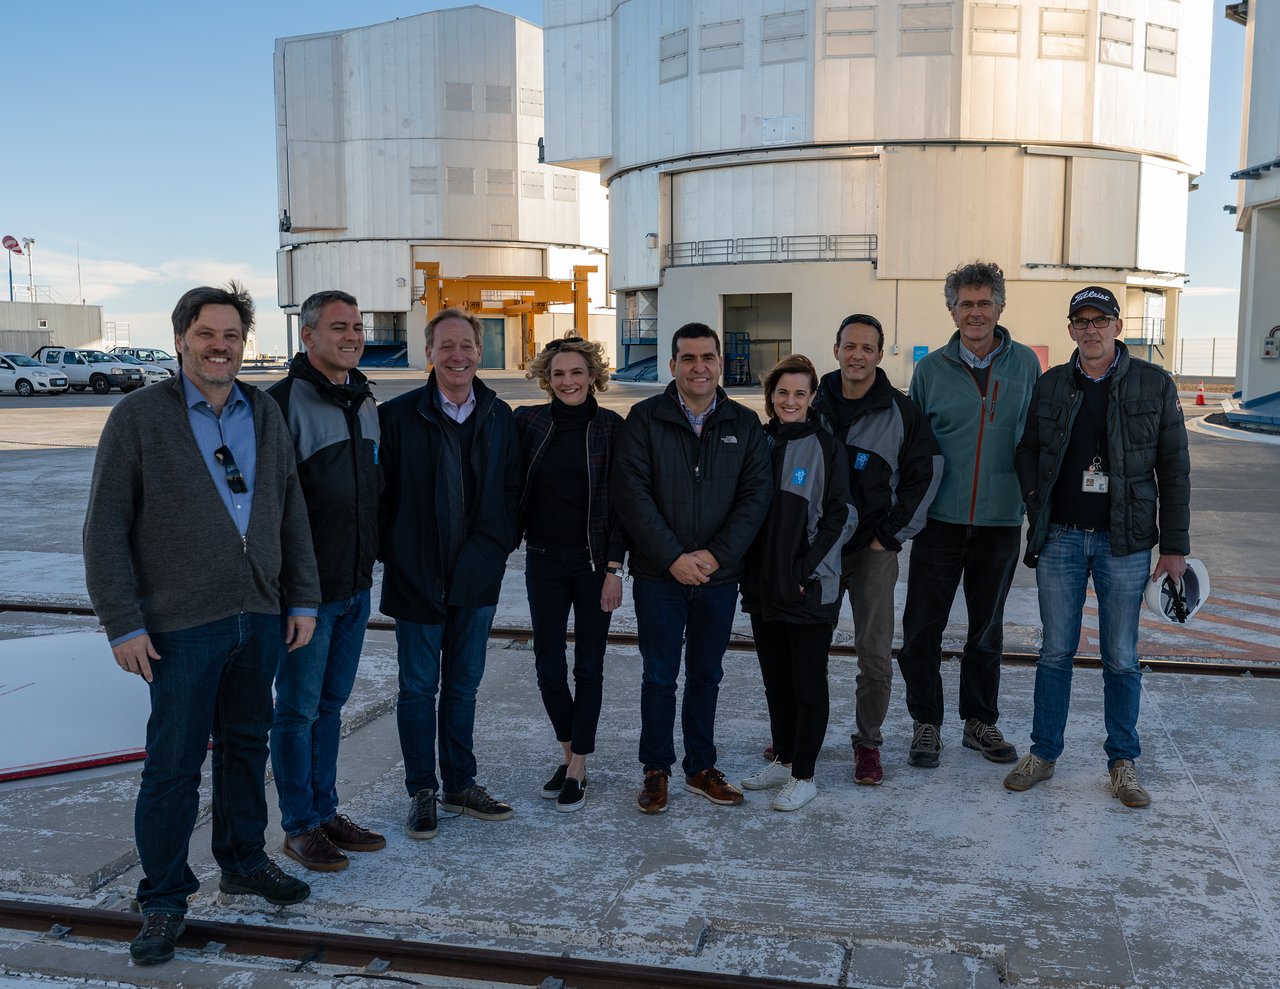 A high-level Microsoft delegation, including the President of Microsoft, Brad Smith, visited ESO’s Paranal Observatory on Friday 24 May 2019.